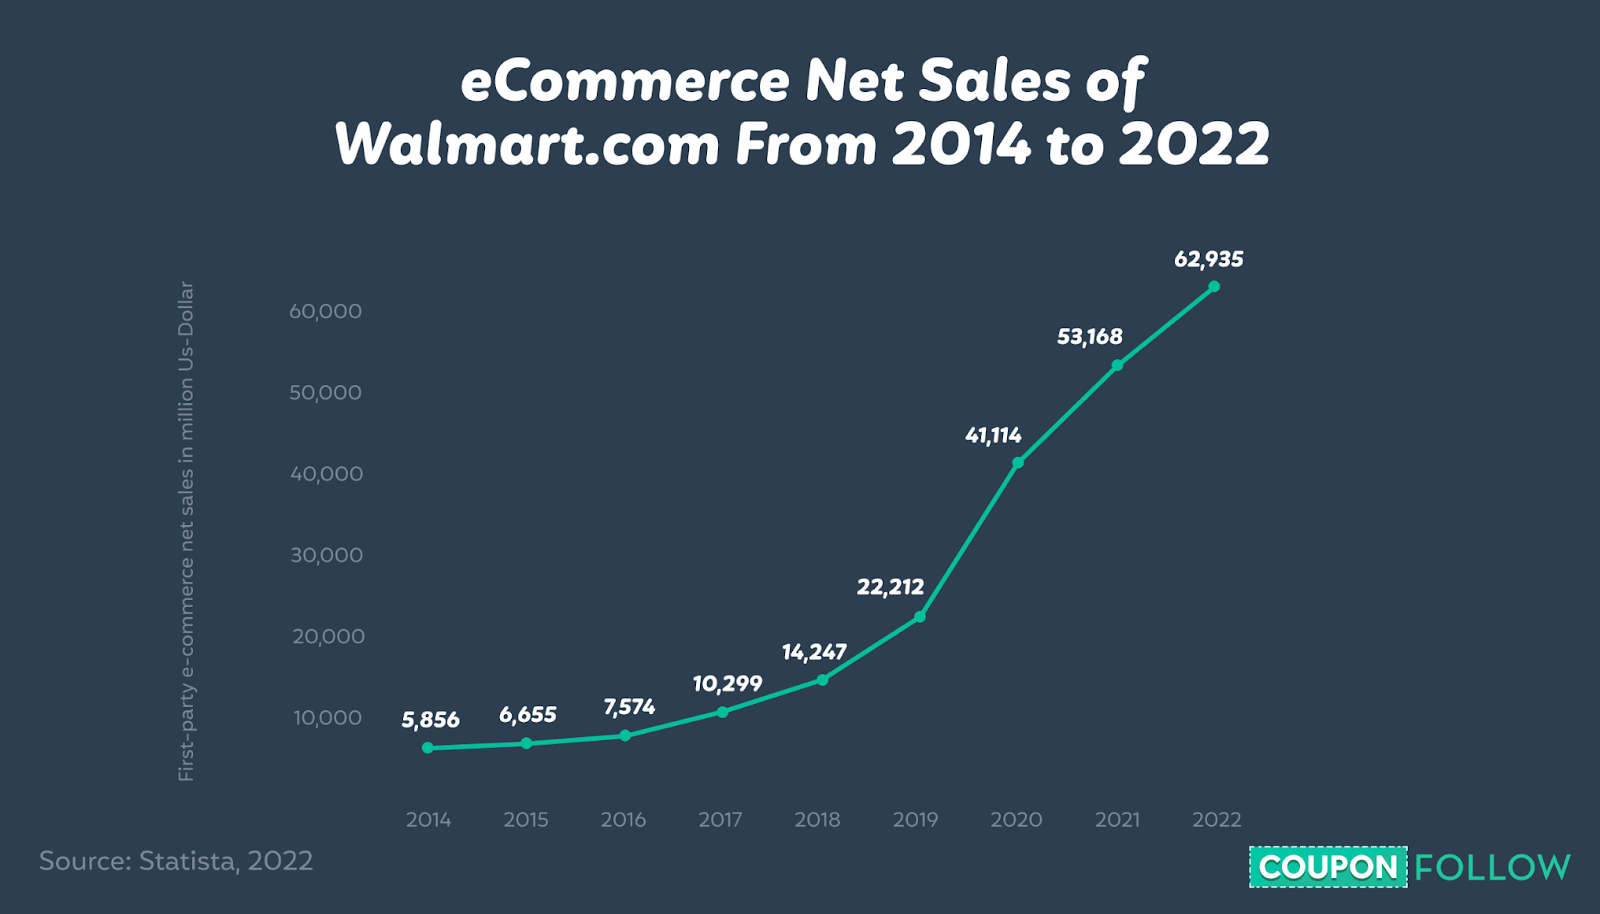 graph depicting the net sales of walmart.com from 2014 to 2022